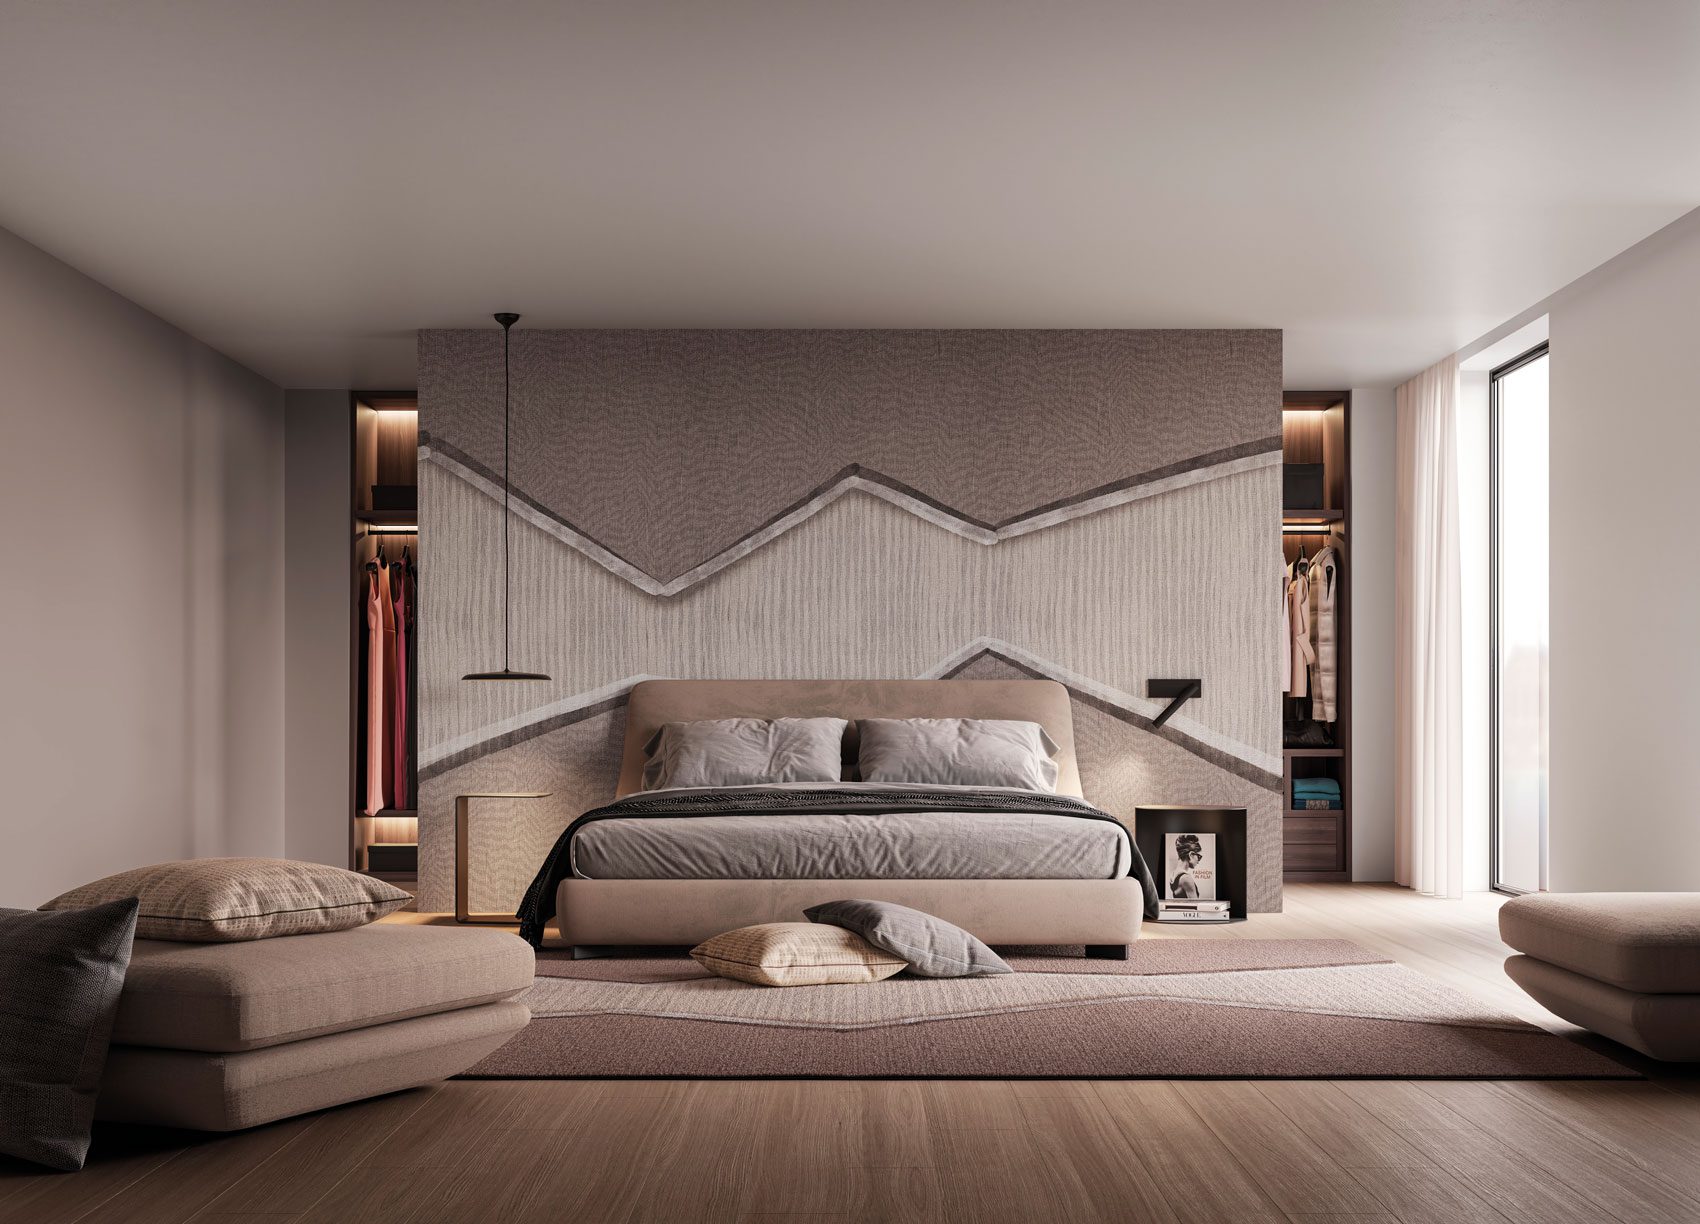 Kaede abstract and modern wallpaper from the Avenue Instabilelab catalogue.